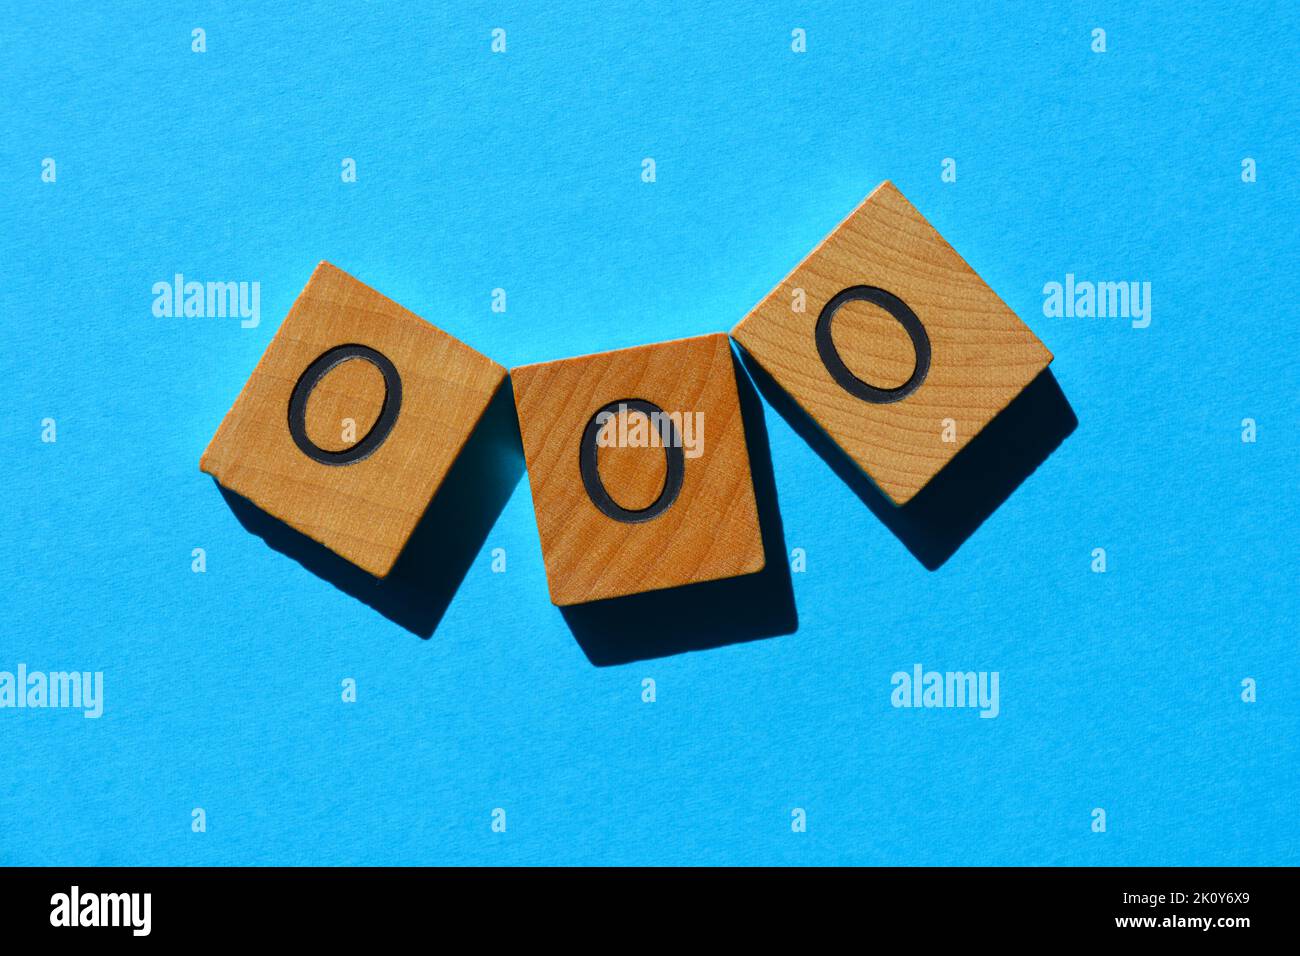 OOO, acronym for Out Of Office in wooden alphabet letters isolated on blue background Stock Photo